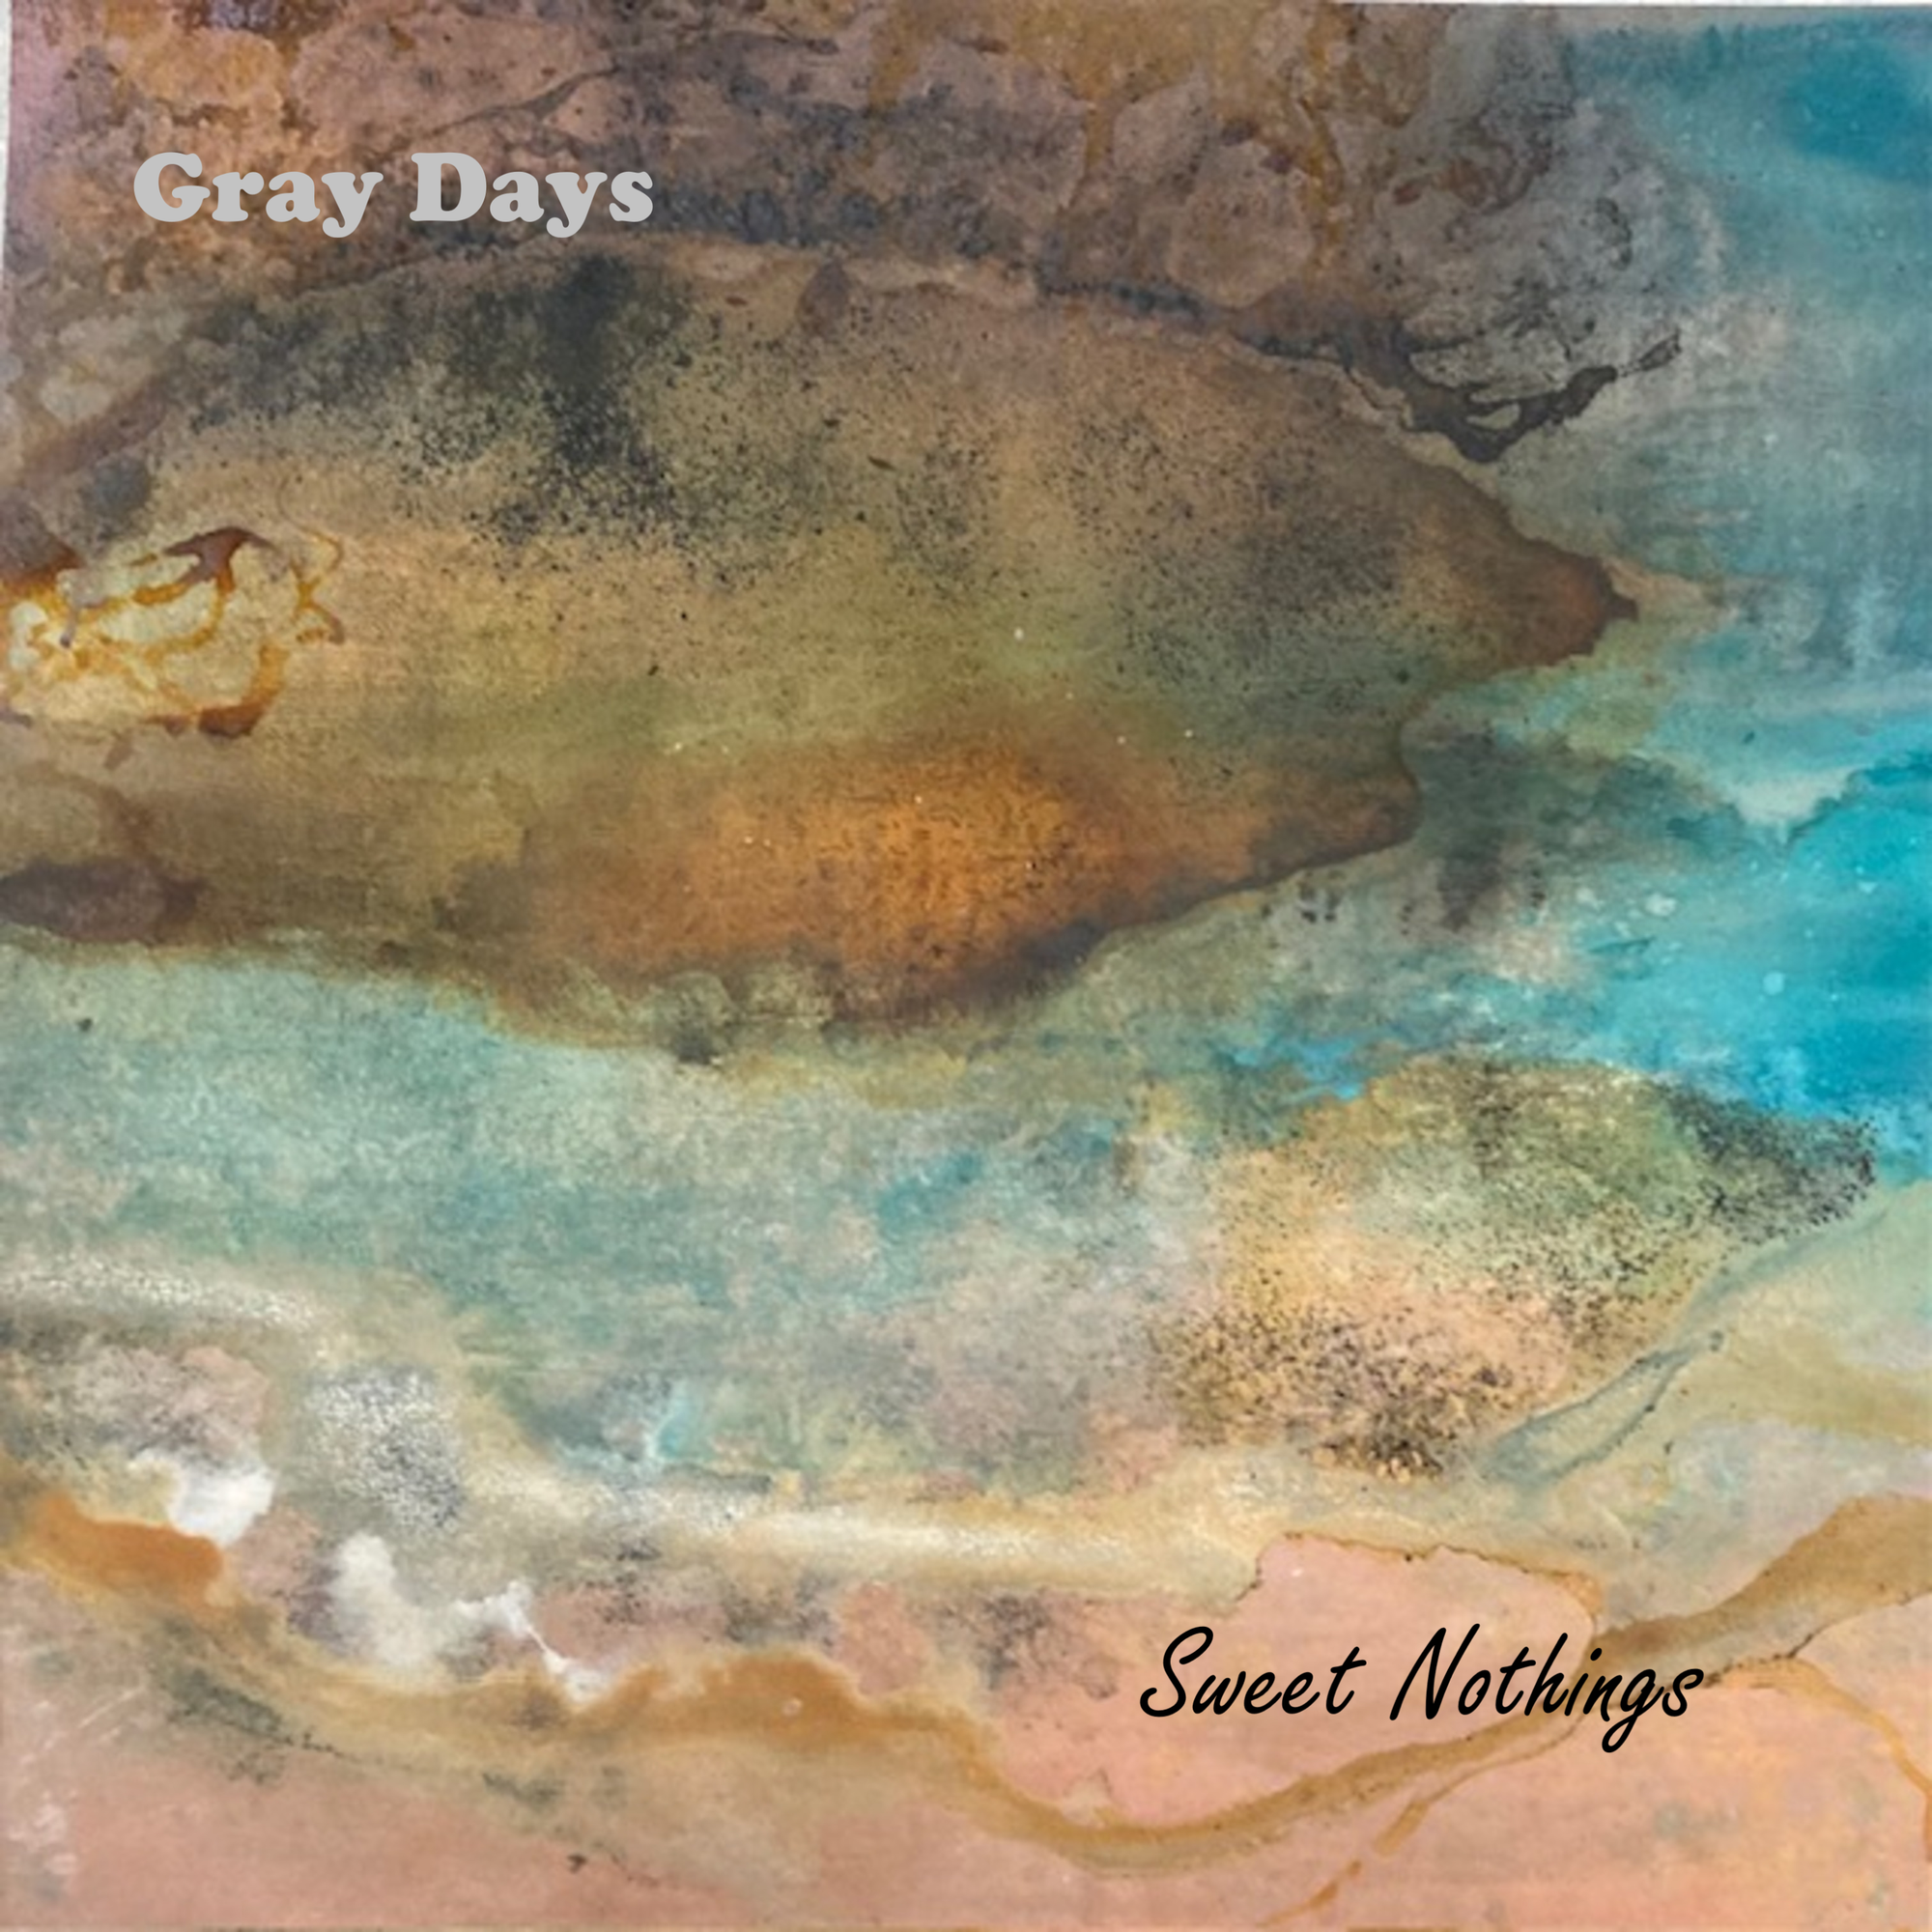 Grays Days explores new recording process with ‘Sweet Nothings’